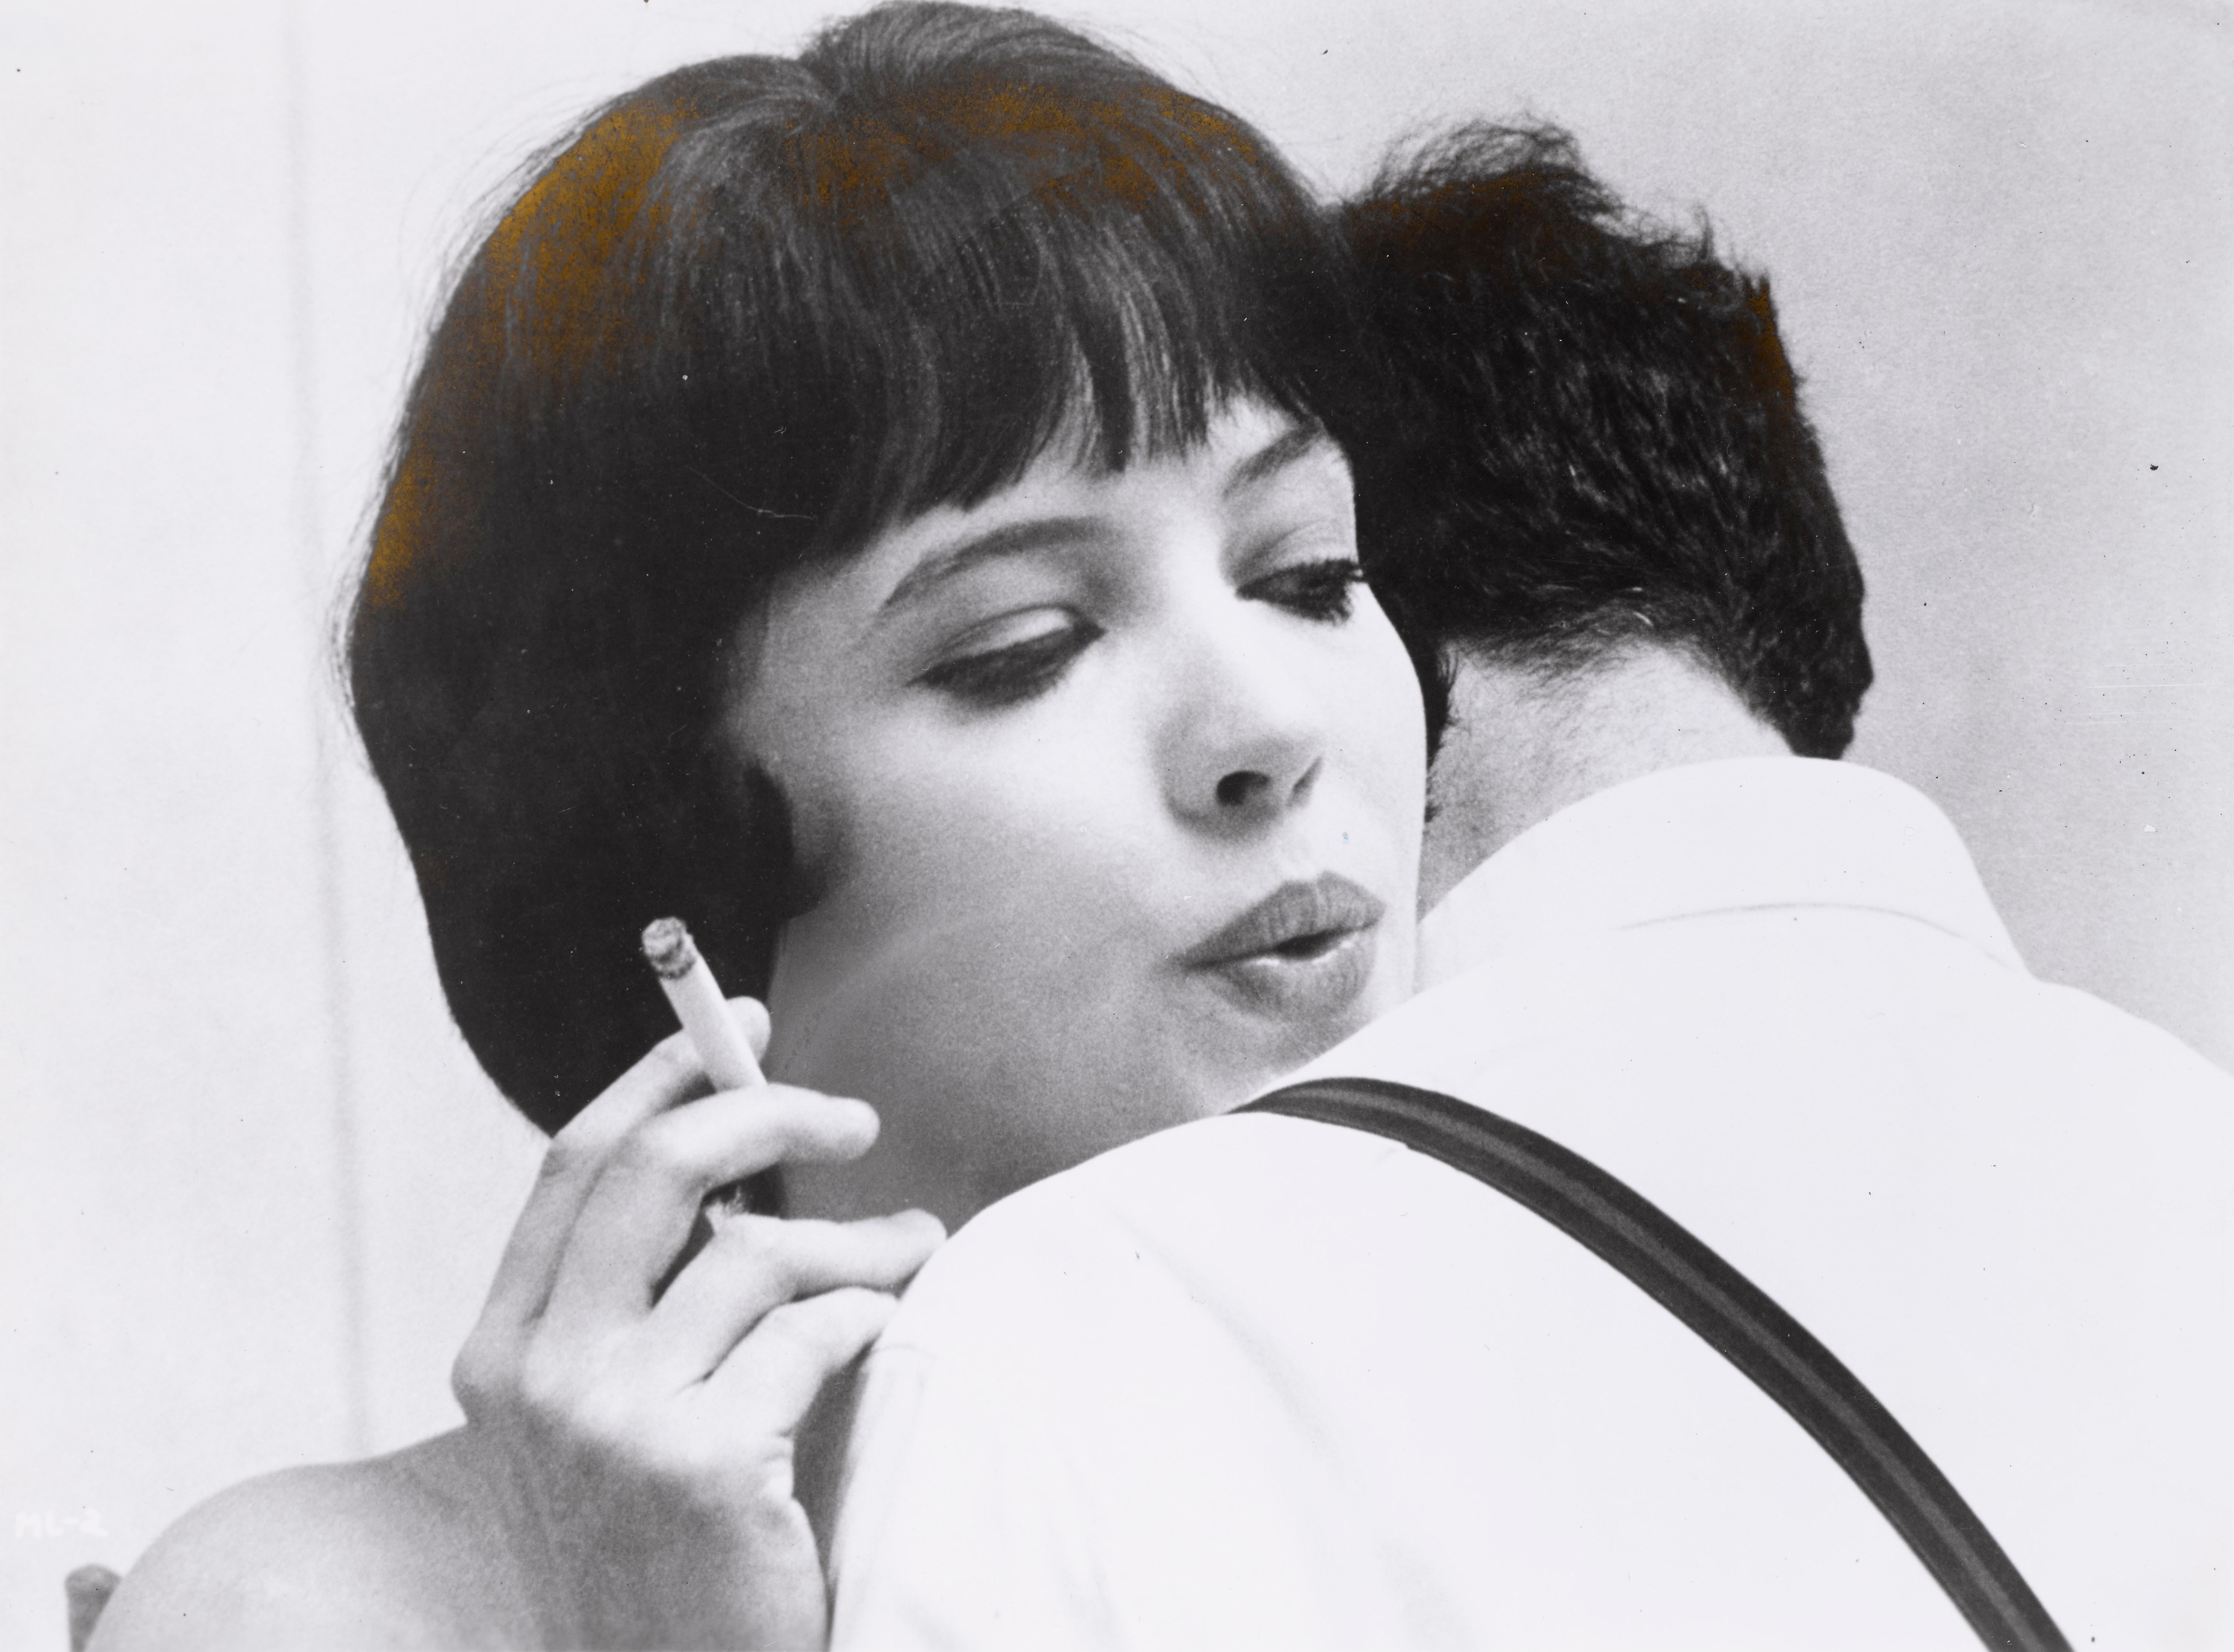 Original US production still for Jean-Luc Godard's classic French new wave.
Film from (1962) Susan Sontag, author and cultural critic, has described Godard's achievement in Vivre Sa Vie as 